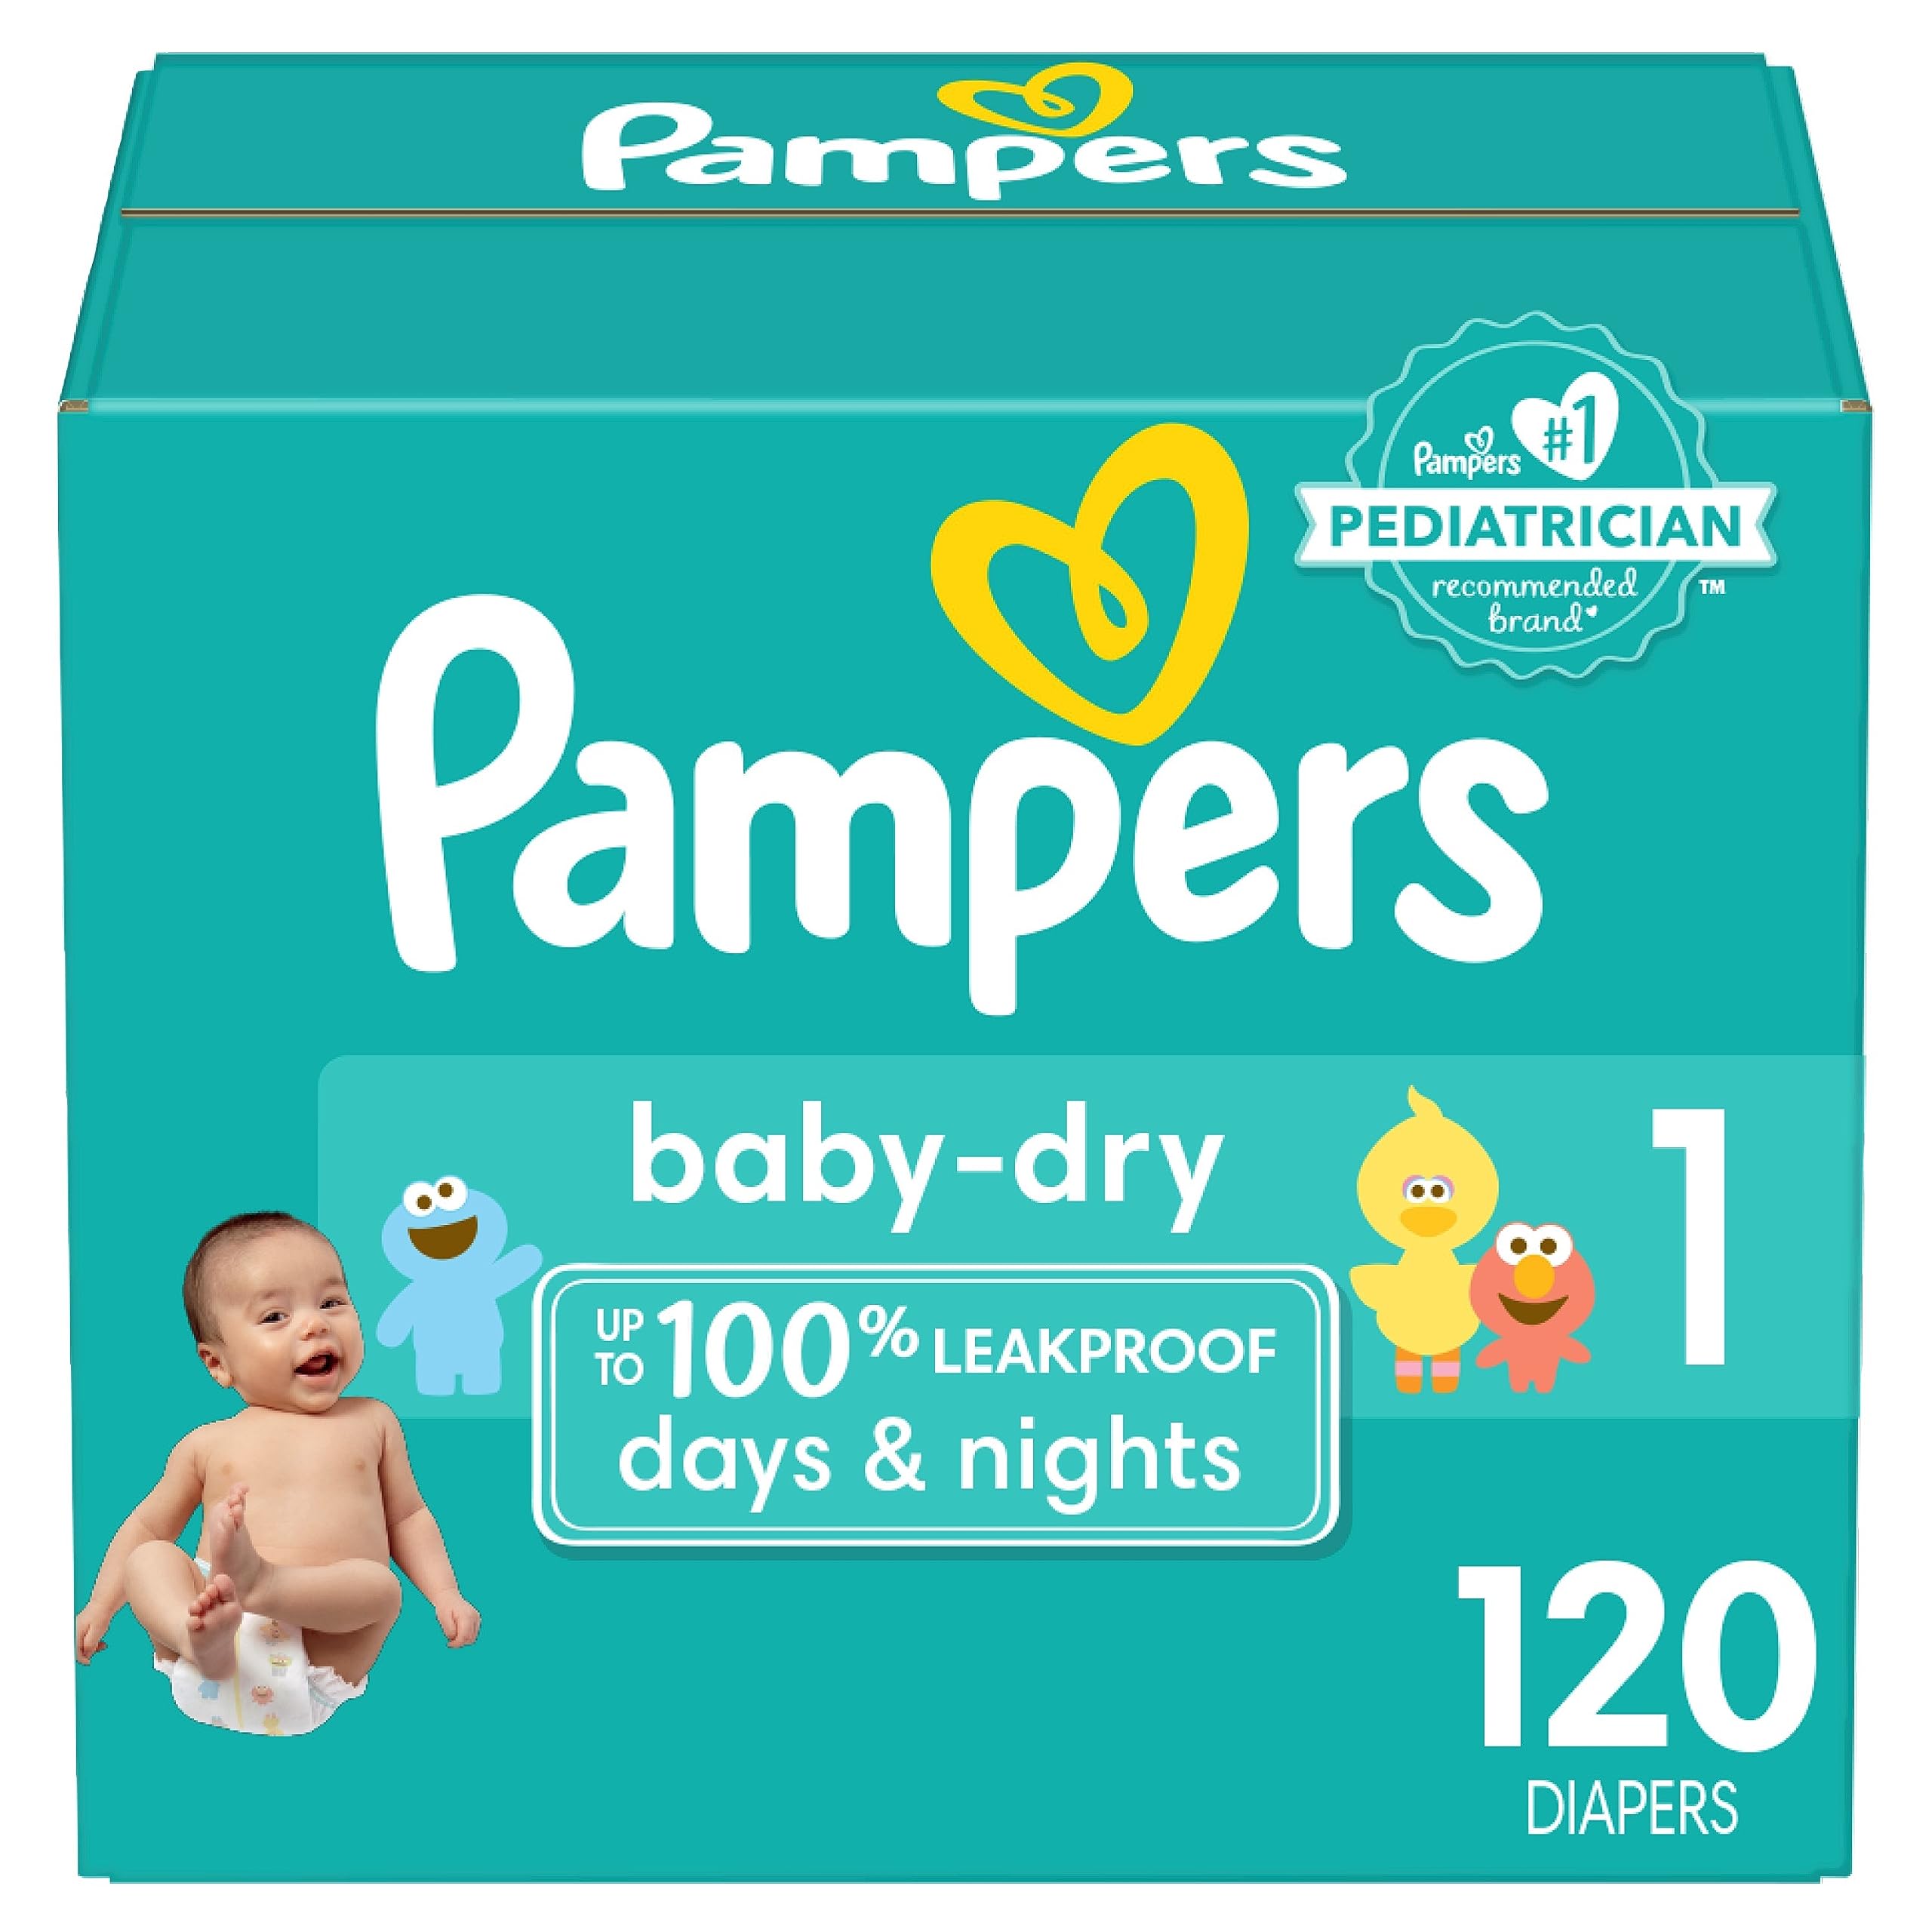 pampers new baby 4 34 szt